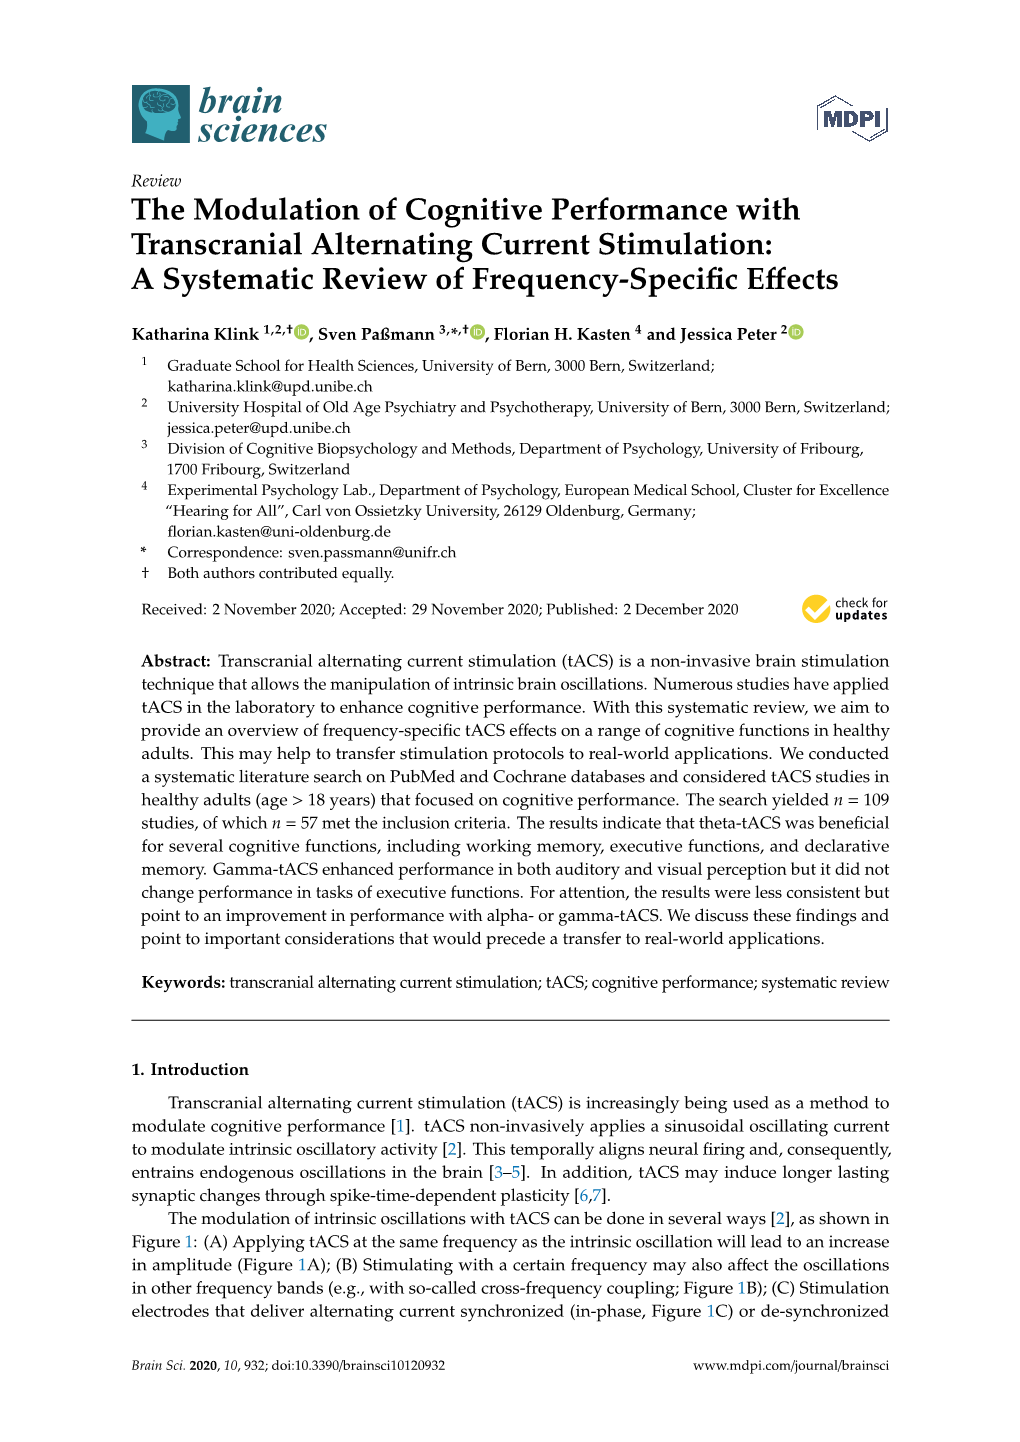 The Modulation of Cognitive Performance with Transcranial Alternating Current Stimulation: a Systematic Review of Frequency-Speciﬁc Eﬀects